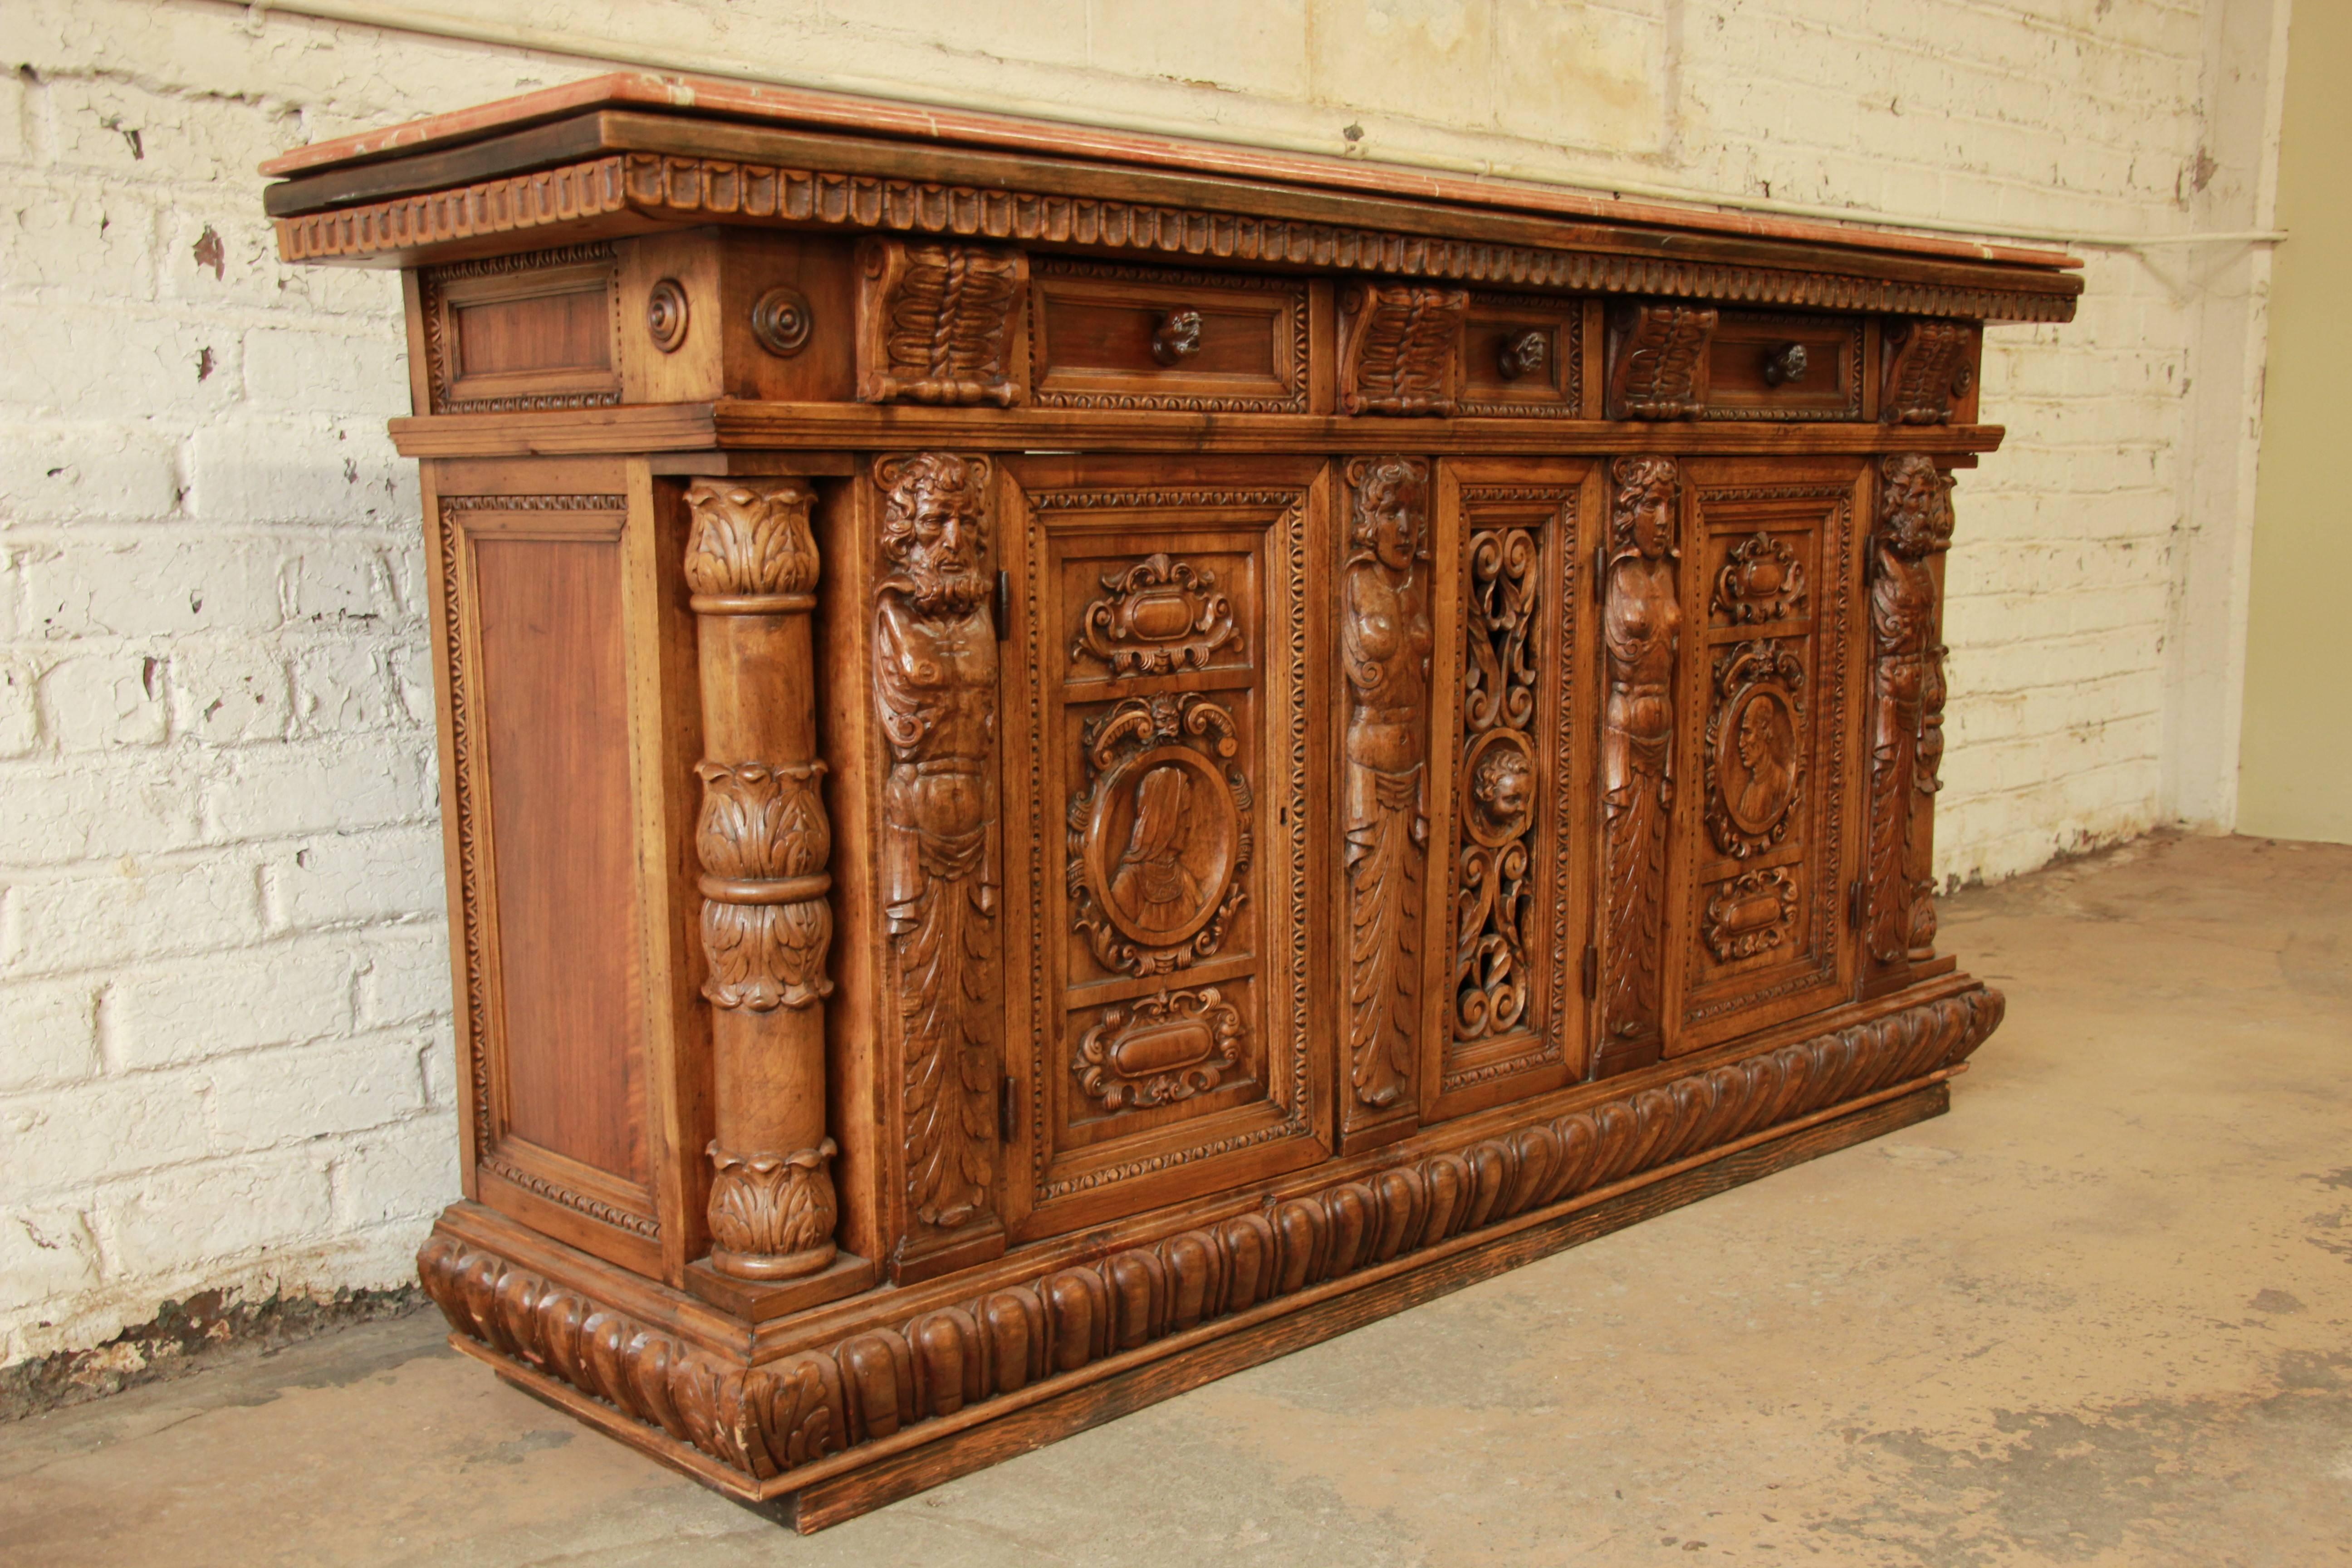 Offering a stunning ornate hand-carved 19th century Belgian sideboard buffet bar cabinet with marble top. The cabinet features stunning carved wood details, including twelve carved faces and carved columns on each end. It is made from mixed wood -